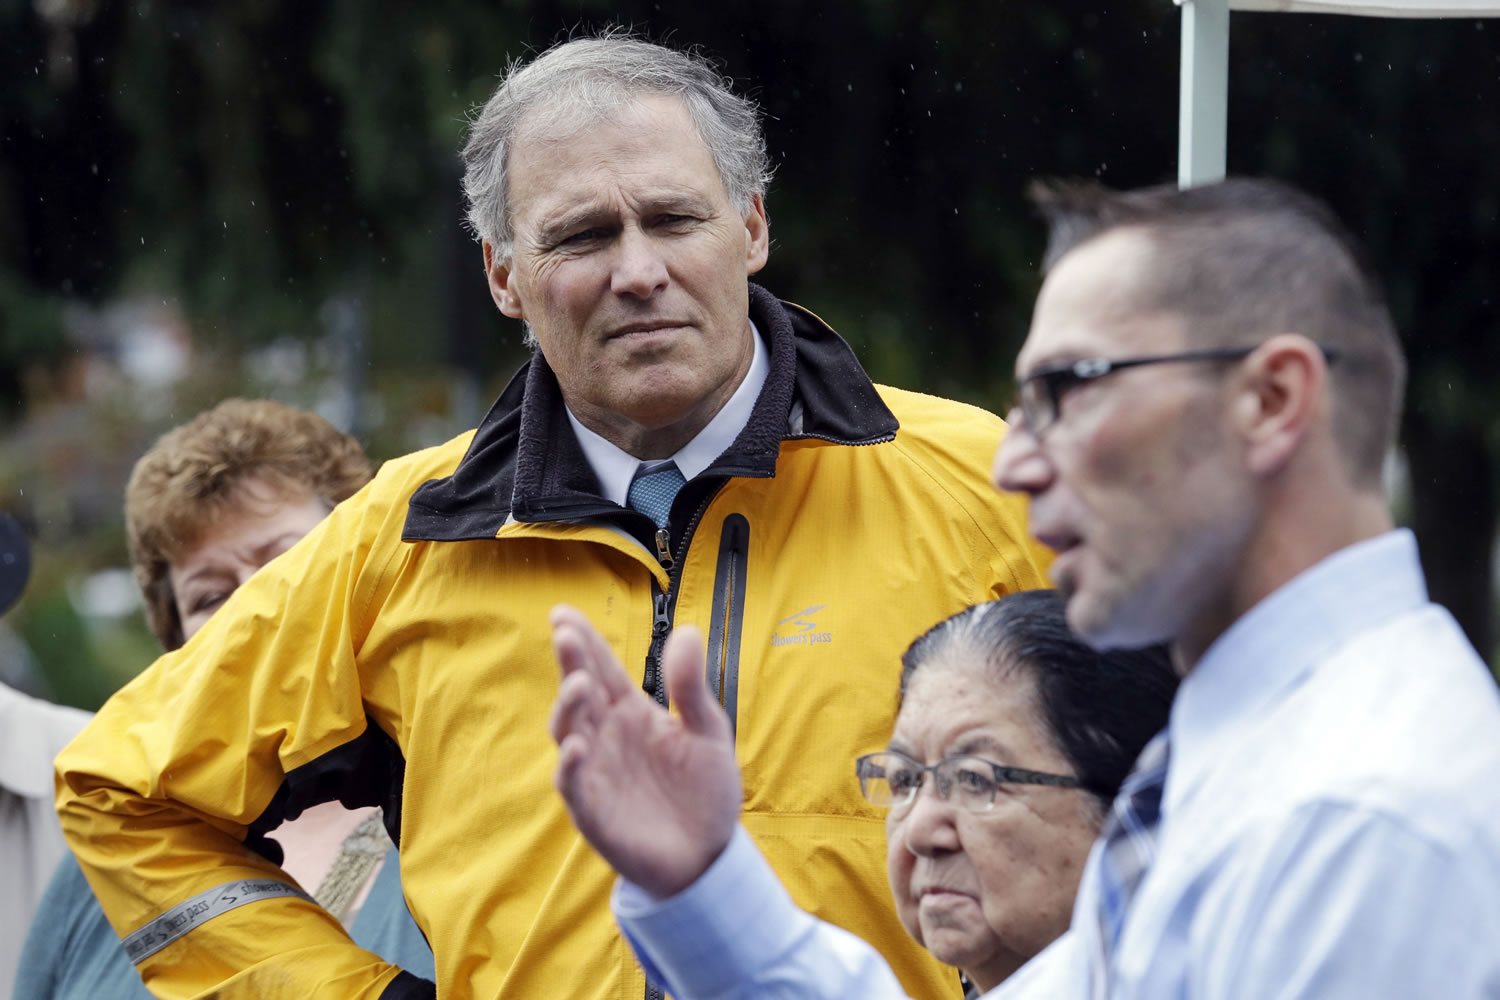 Gov. Jay Inslee, left, and Muckleshoot Chairwoman Virginia Cross look on as Muckleshoot Tribal Council member and Fish Commission Chair Louie Ungaro, right, speaks before a brief tour at the Green River in Auburn in 2014.